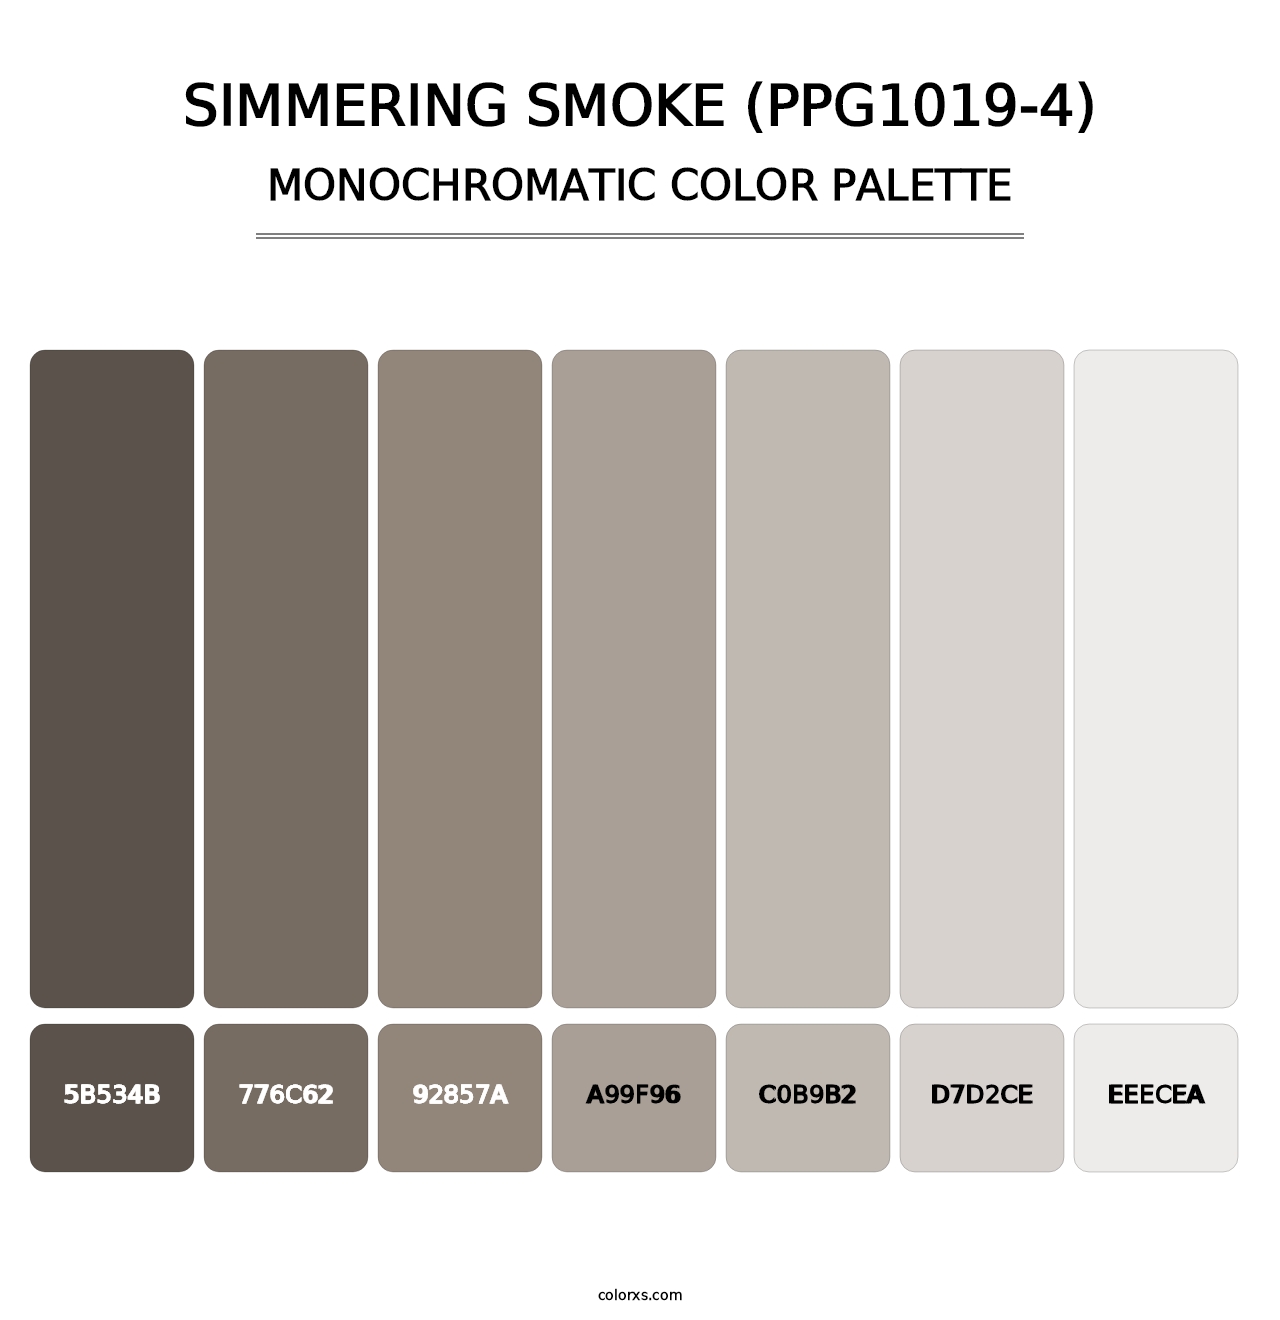 Simmering Smoke (PPG1019-4) - Monochromatic Color Palette